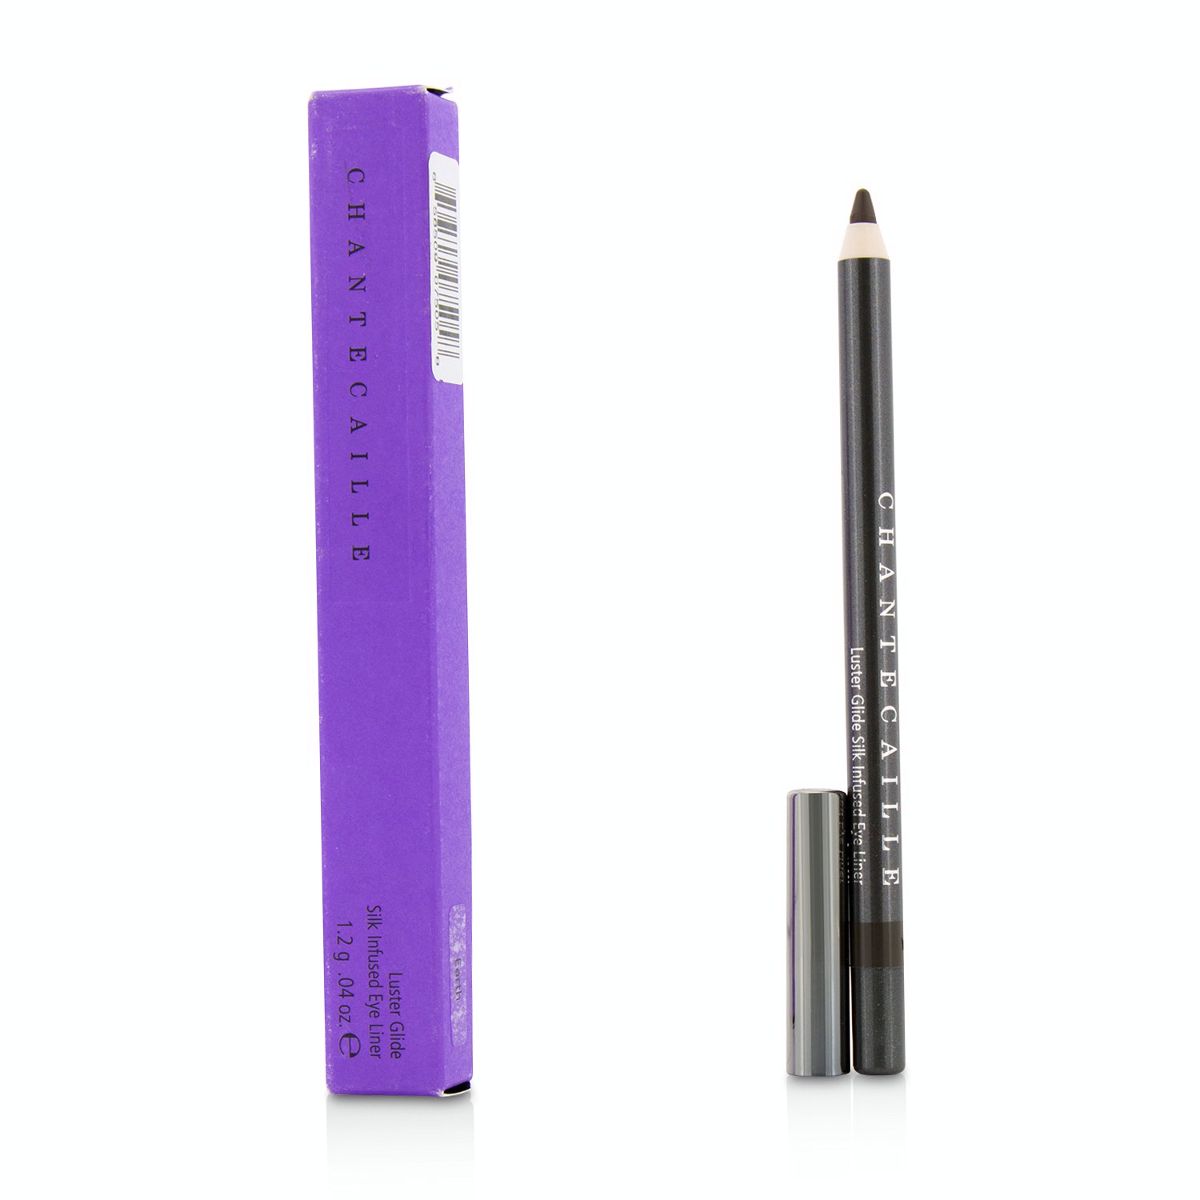 Luster Glide Silk Infused Eye Liner - Earth Chantecaille Image